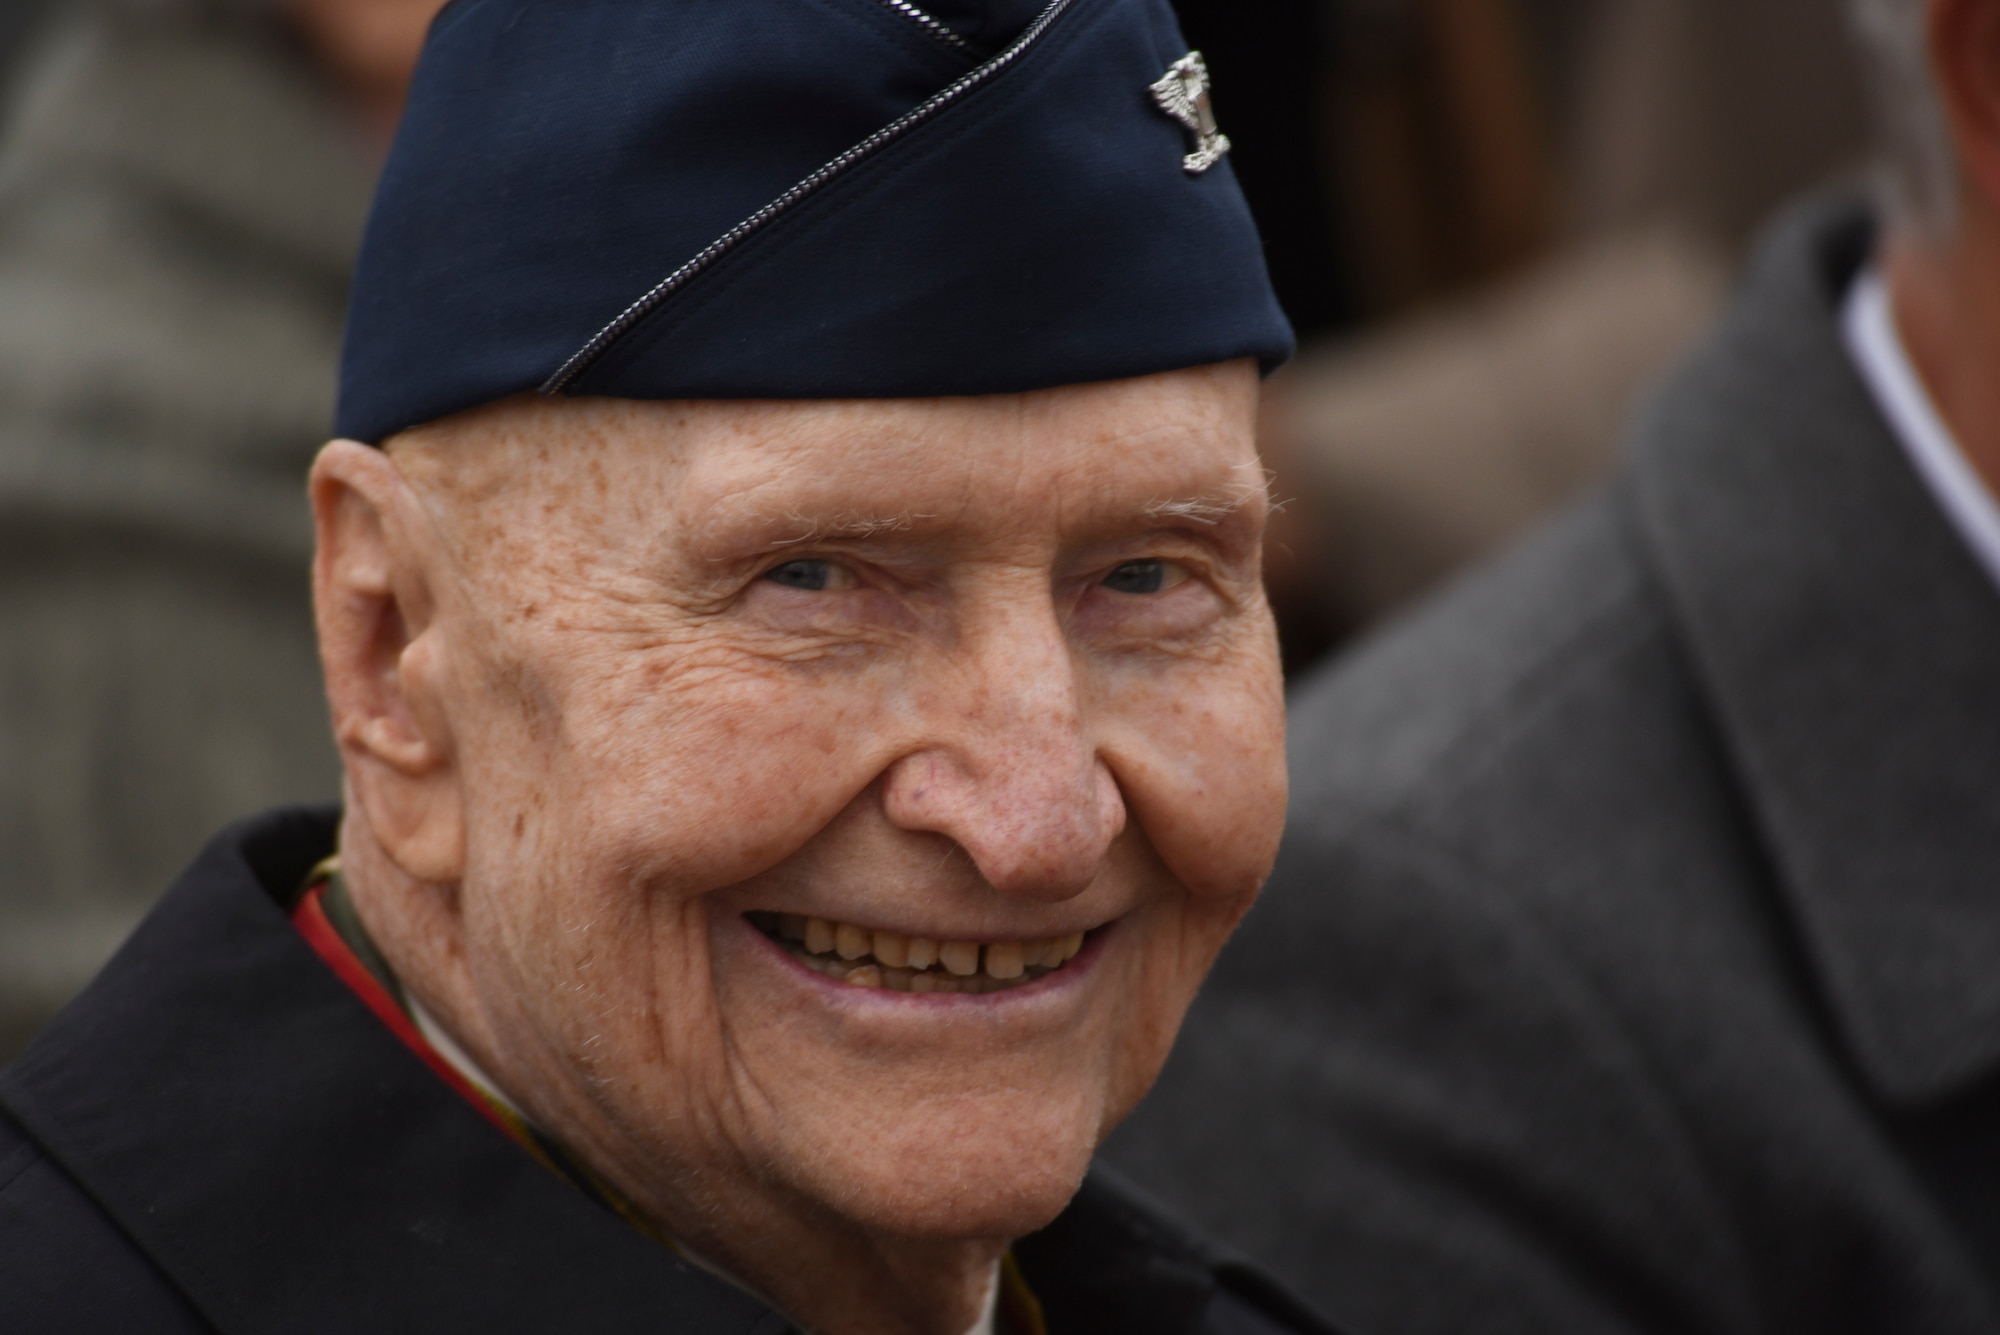 Retired U.S. Air Force Col. Gail Halvorsen, a C-52 Skymaster pilot also known as the Candy Bomber, smiles during the reopening ceremony of the Berlin Airlift Memorial outside Frankfurt International Airport, Germany, Nov. 22, 2016. Halvorsen and his fellow pilots dropped 23 tons of candy with makeshift parachutes from his C-54 as part of the Berlin Airlift, which delivered more than two million tons of food to the blockaded citizens of West Berlin between June 1948 and September 1949. (U.S. Air Force photo by Staff Sgt. Joe W. McFadden)